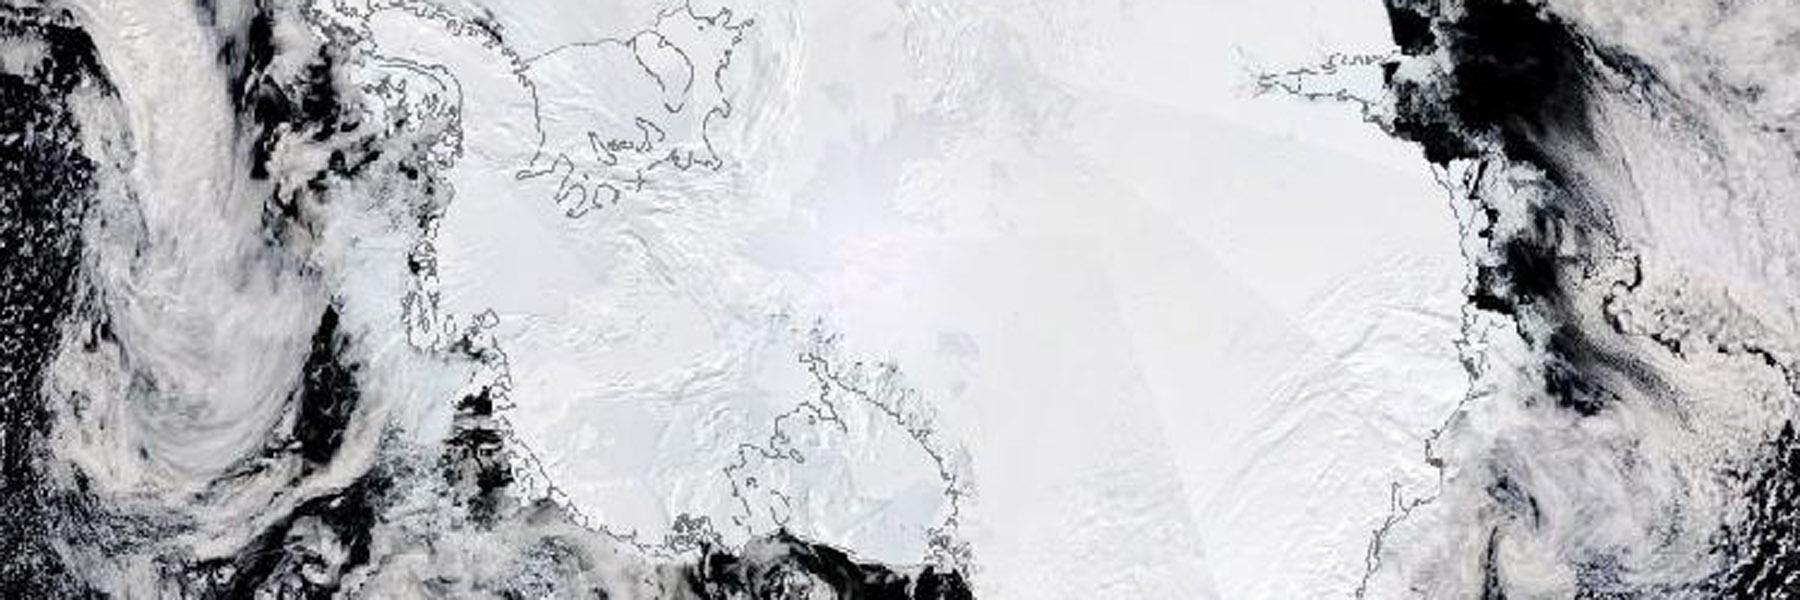 Antarctic sea ice as seen from satellite